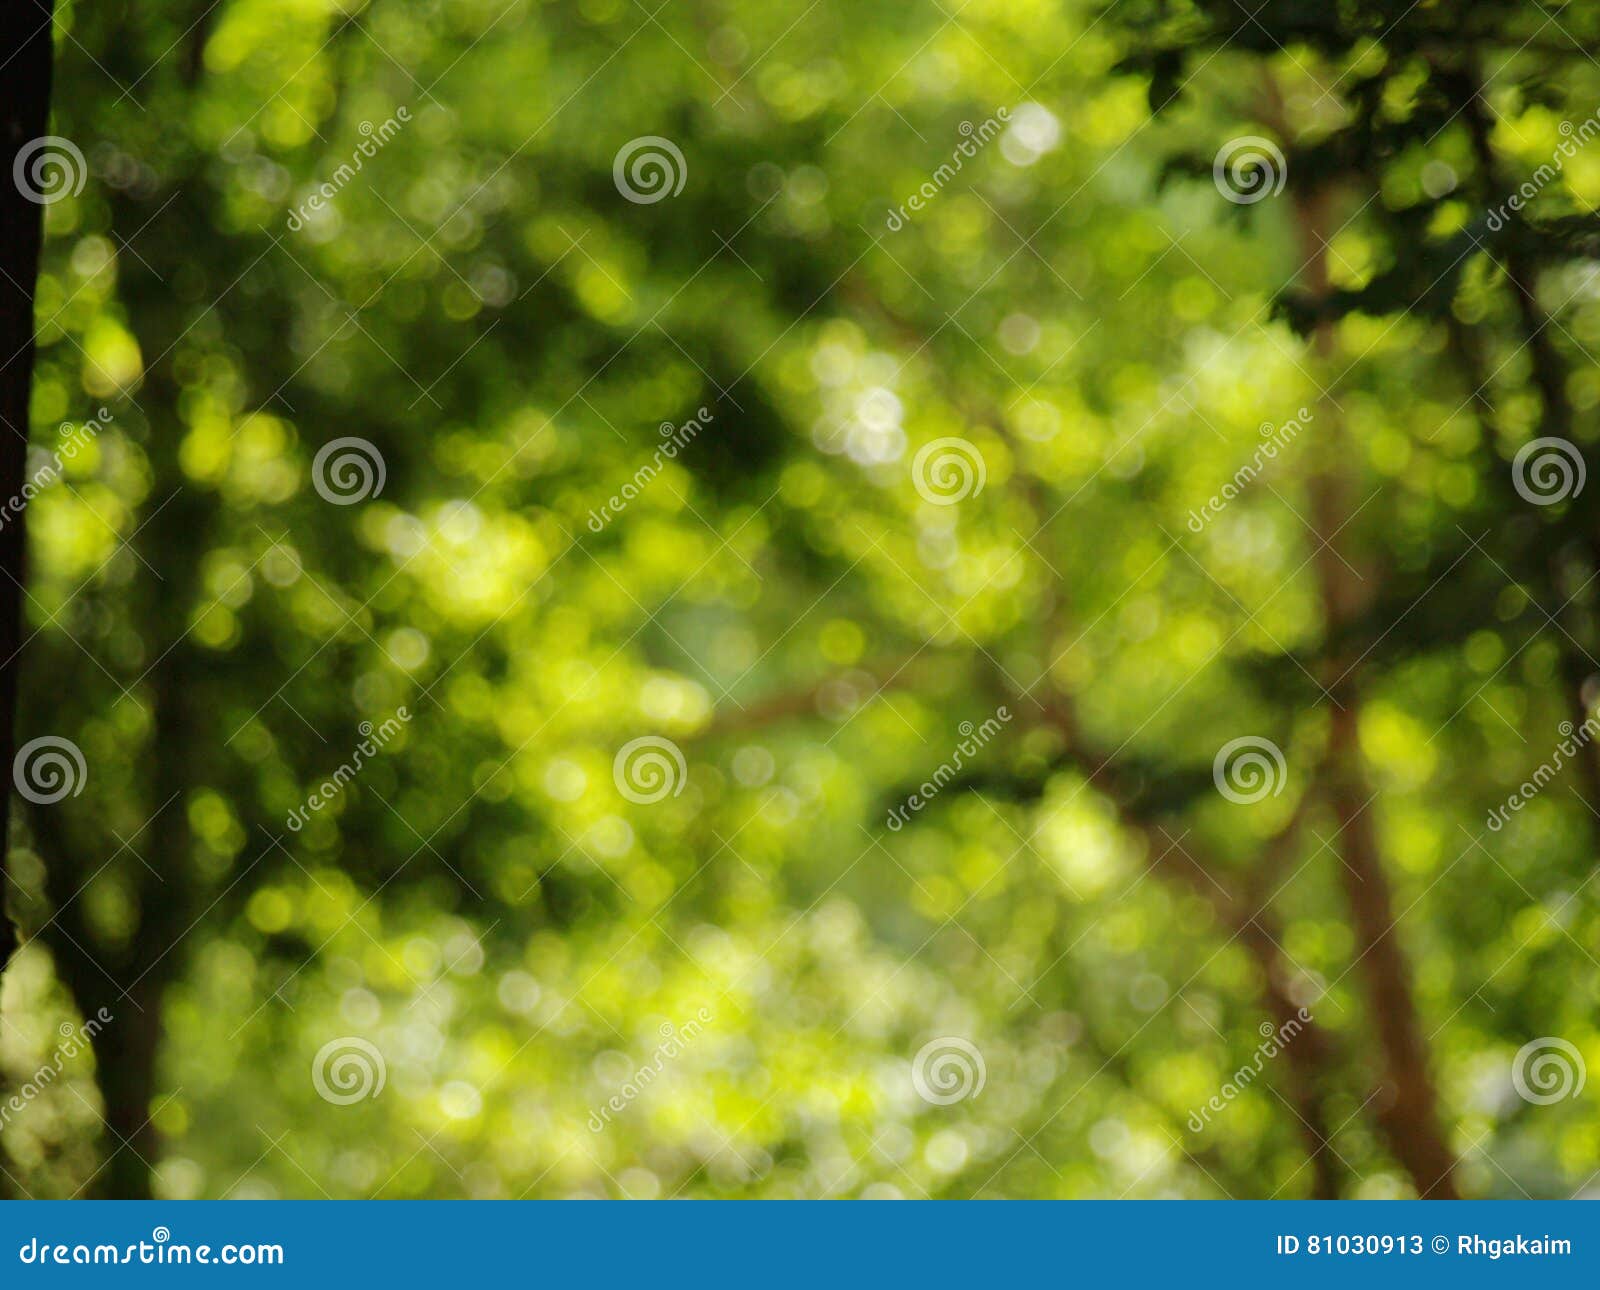 Natural Green Leaves Background Stock Image Image of 